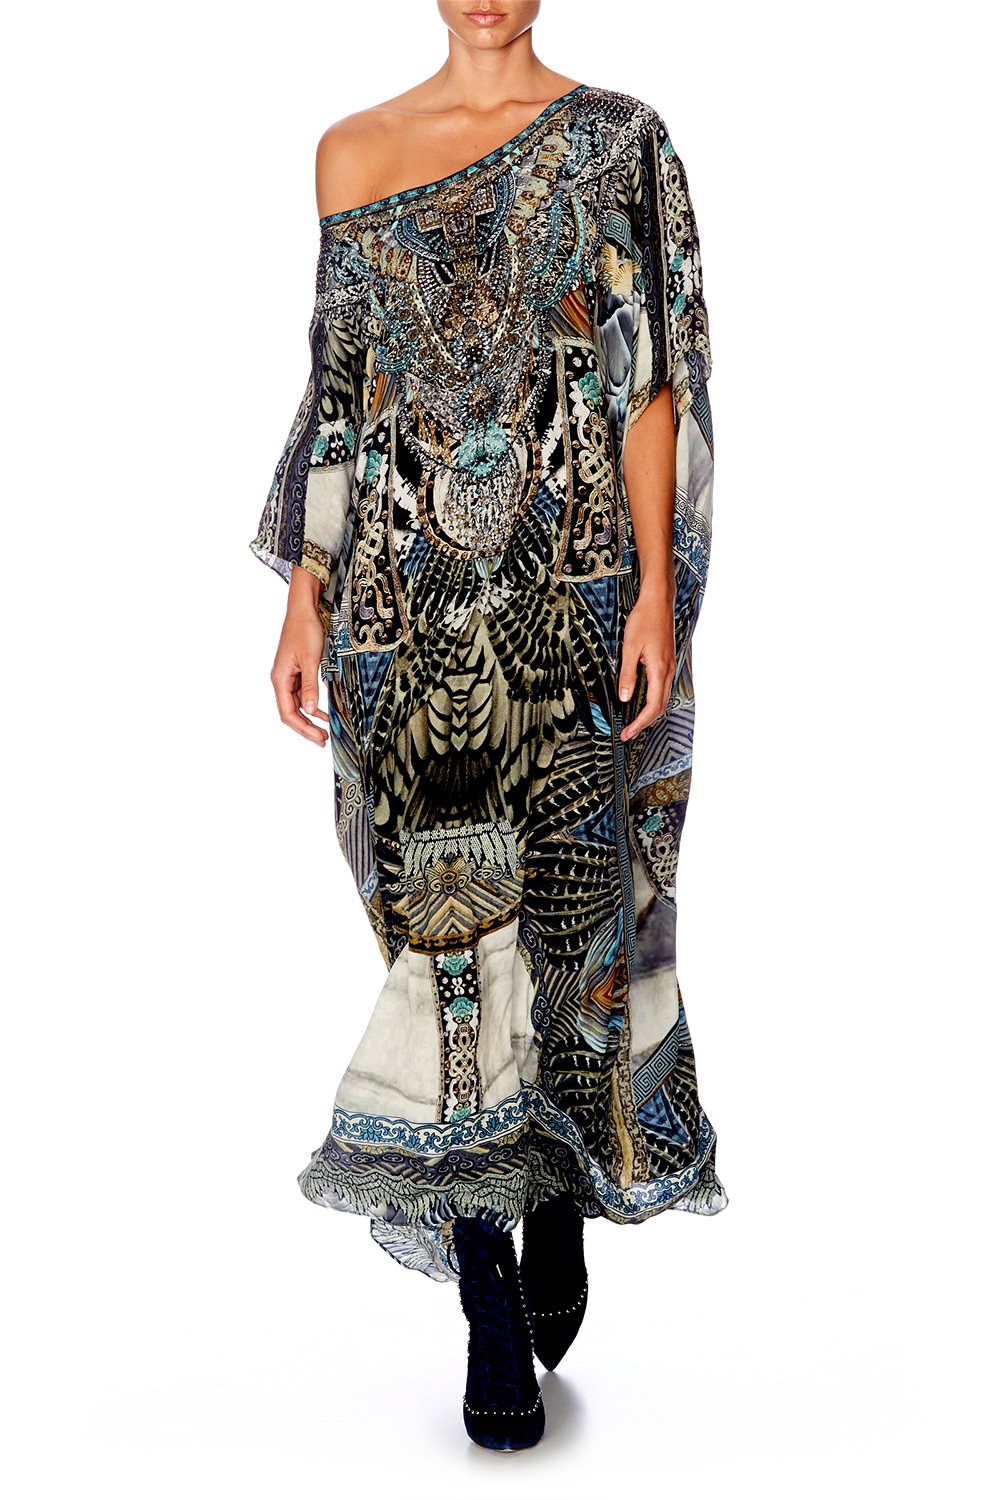 ROUND NECK KAFTAN GIRL ON THE WING – CAMILLA